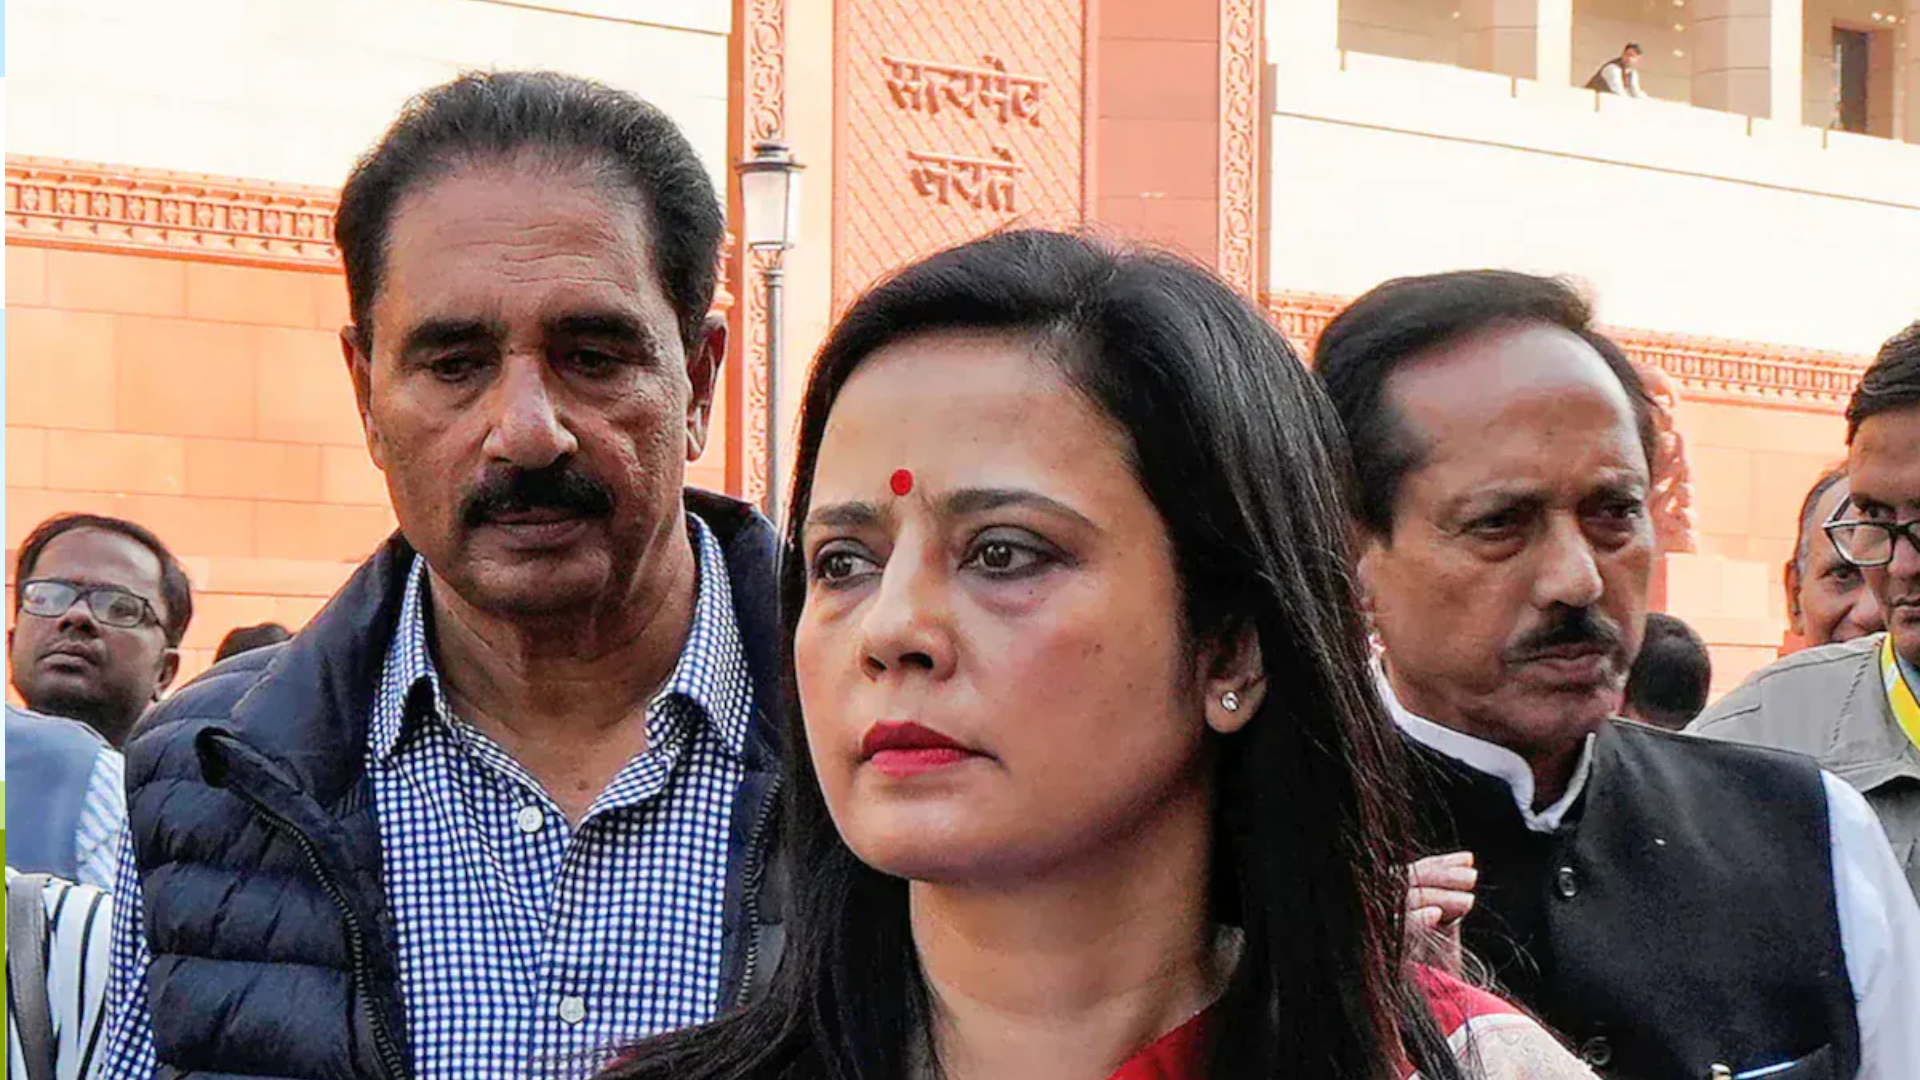 Lokpal Directs CBI Probe into ‘Cash for Query’ Allegations Against Trinamool Congress Leader Mahua Moitra